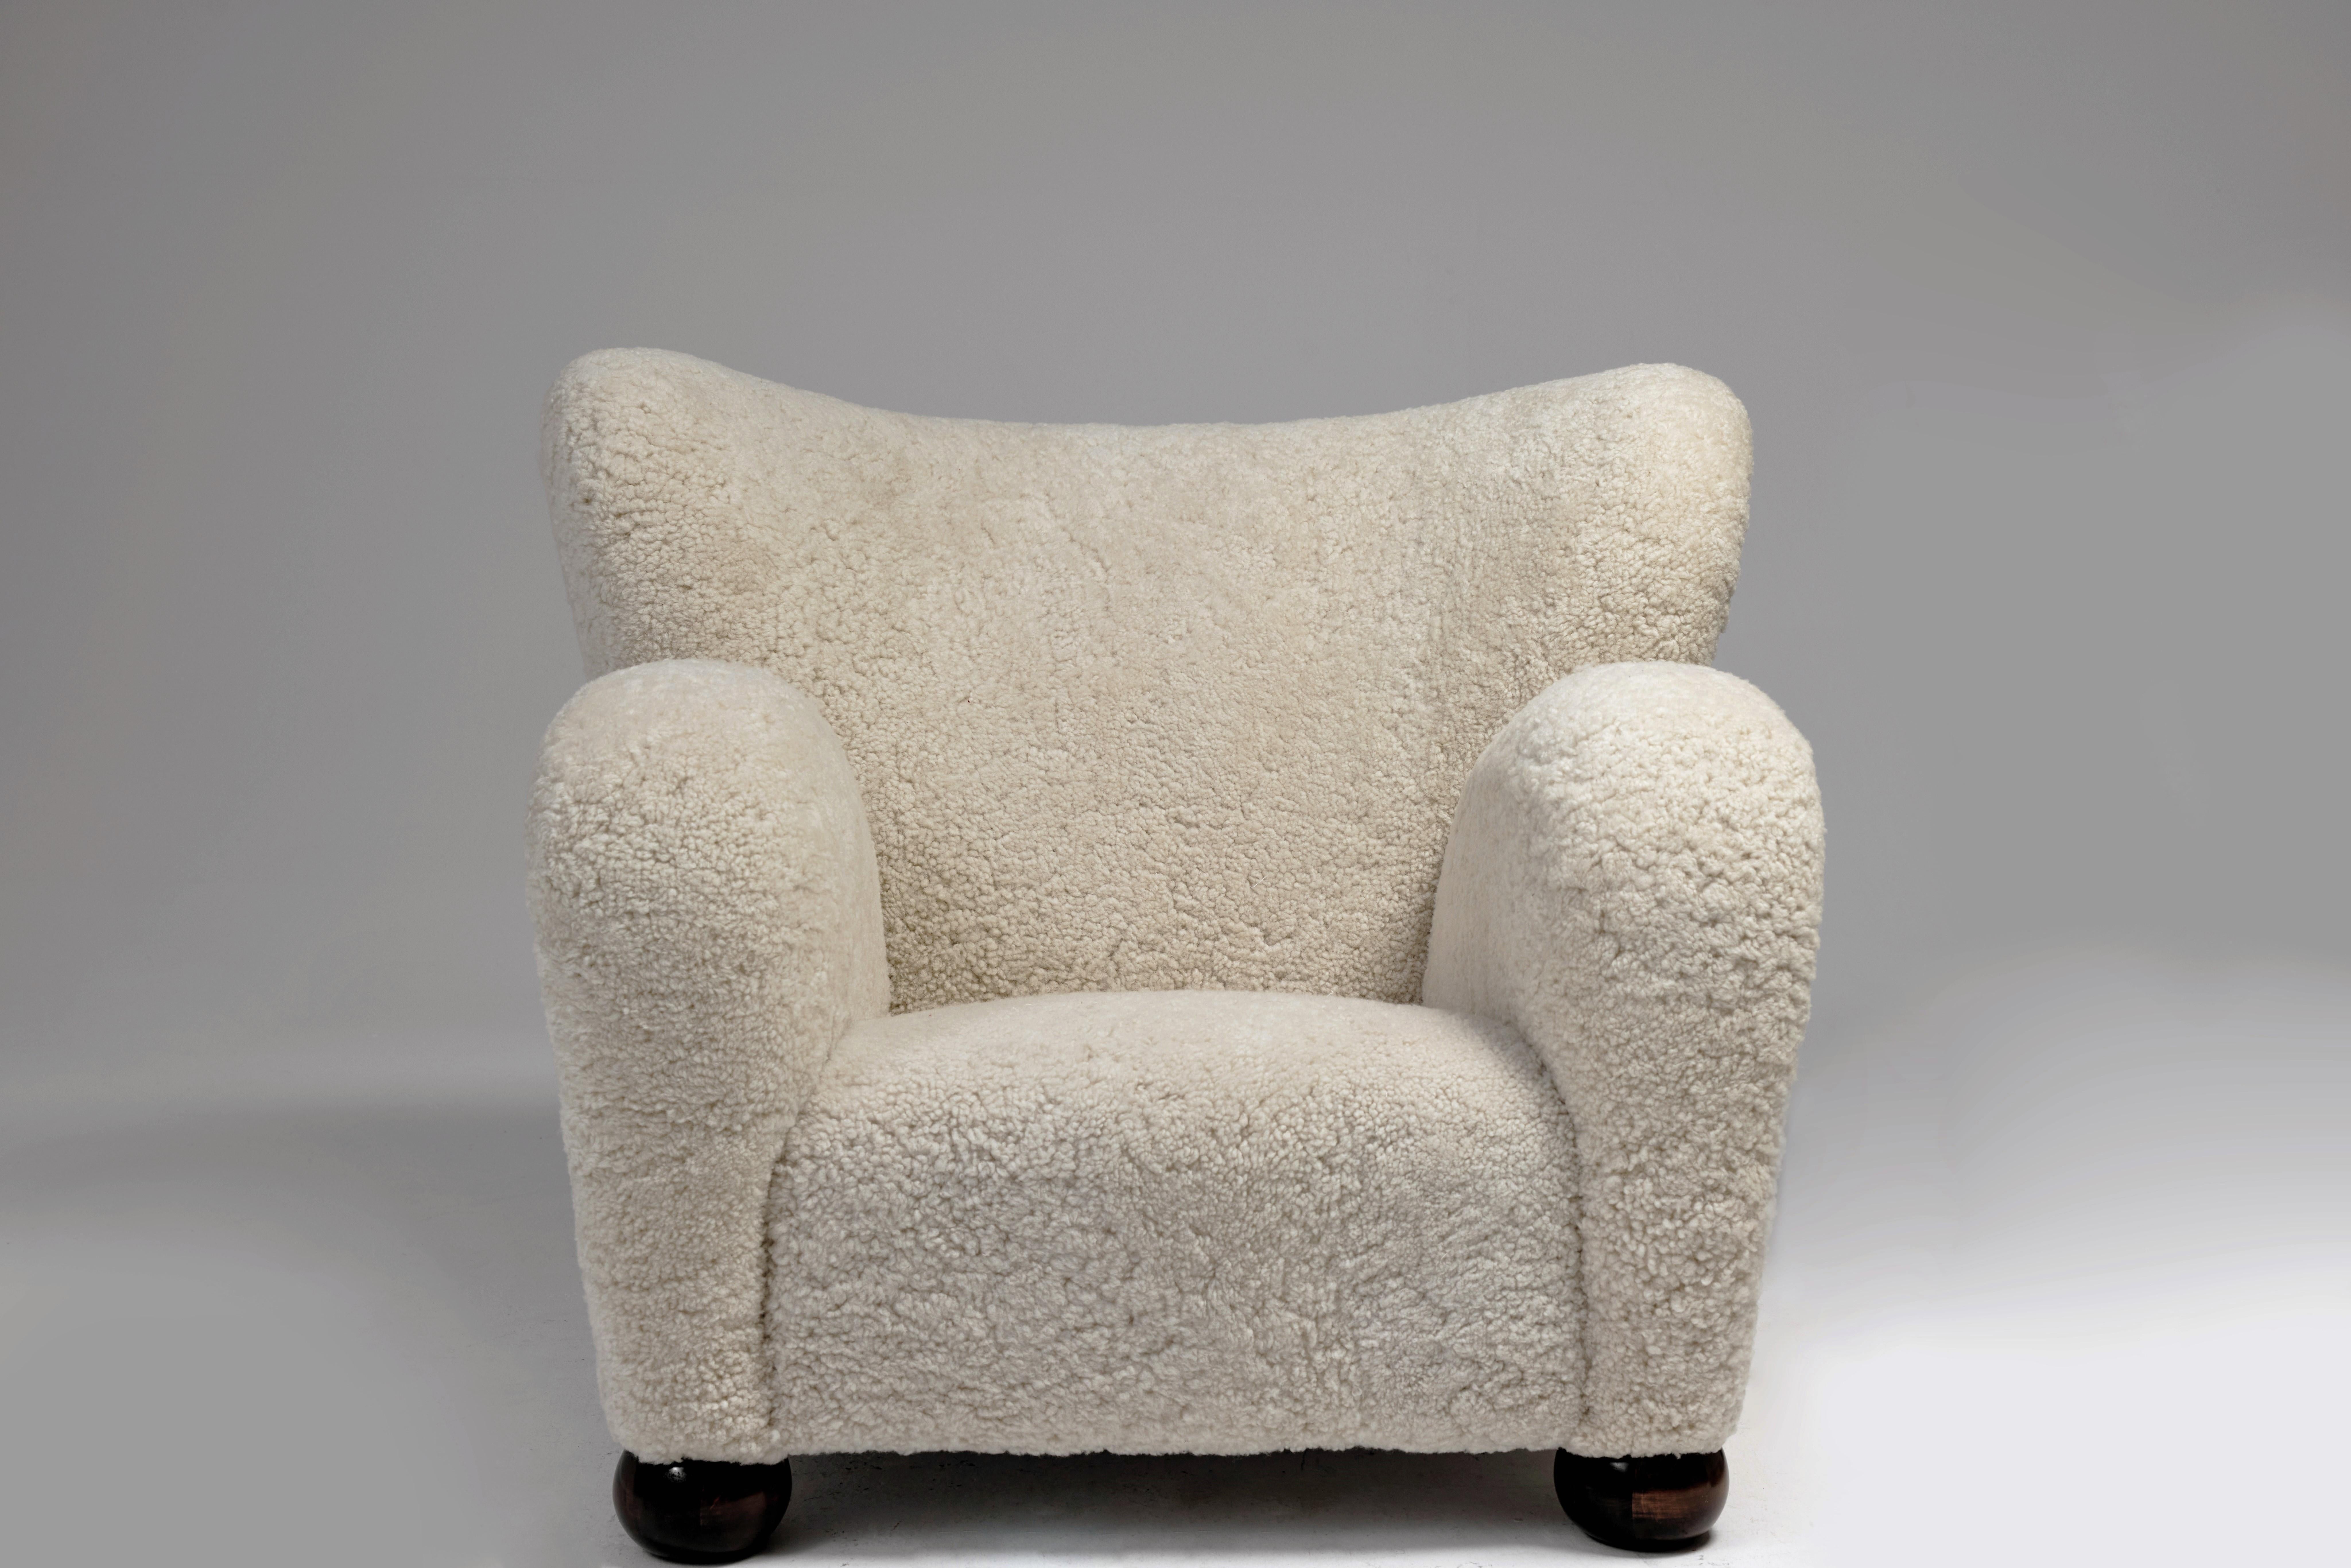 Scandinavian Modern Marta Blomstedt  Sheepskin Wing Chairs for the Aulanko Hotel, Finland, 1930s. For Sale